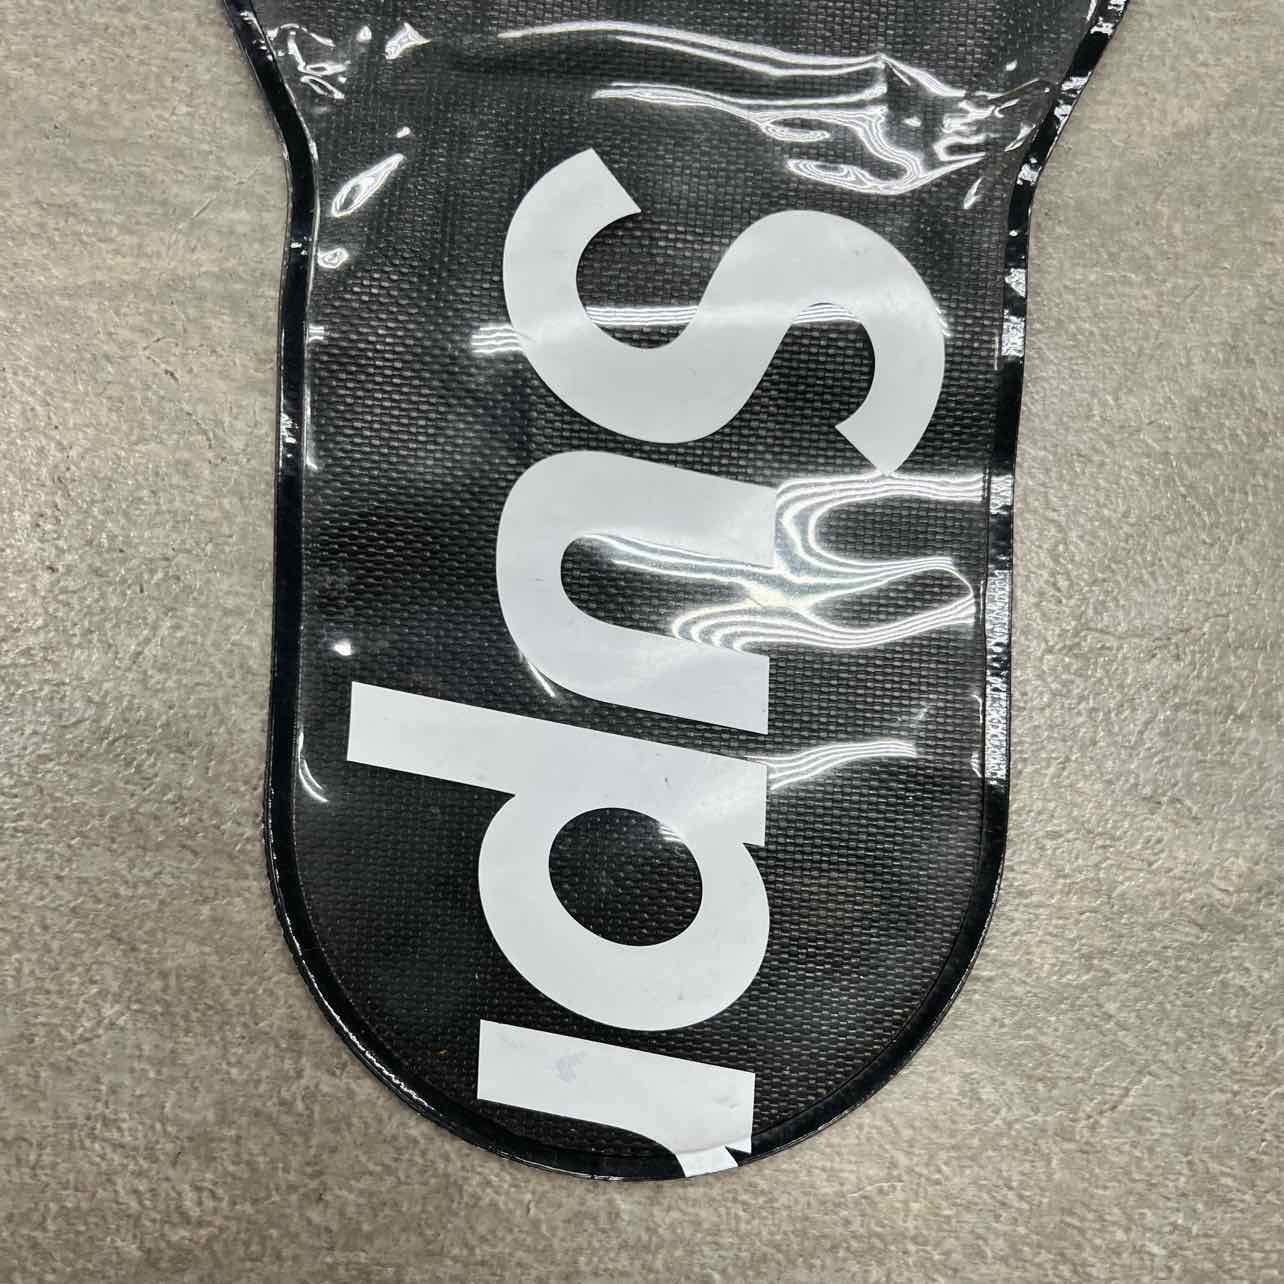 Supreme Pouch "SEAL LINE" Used Black